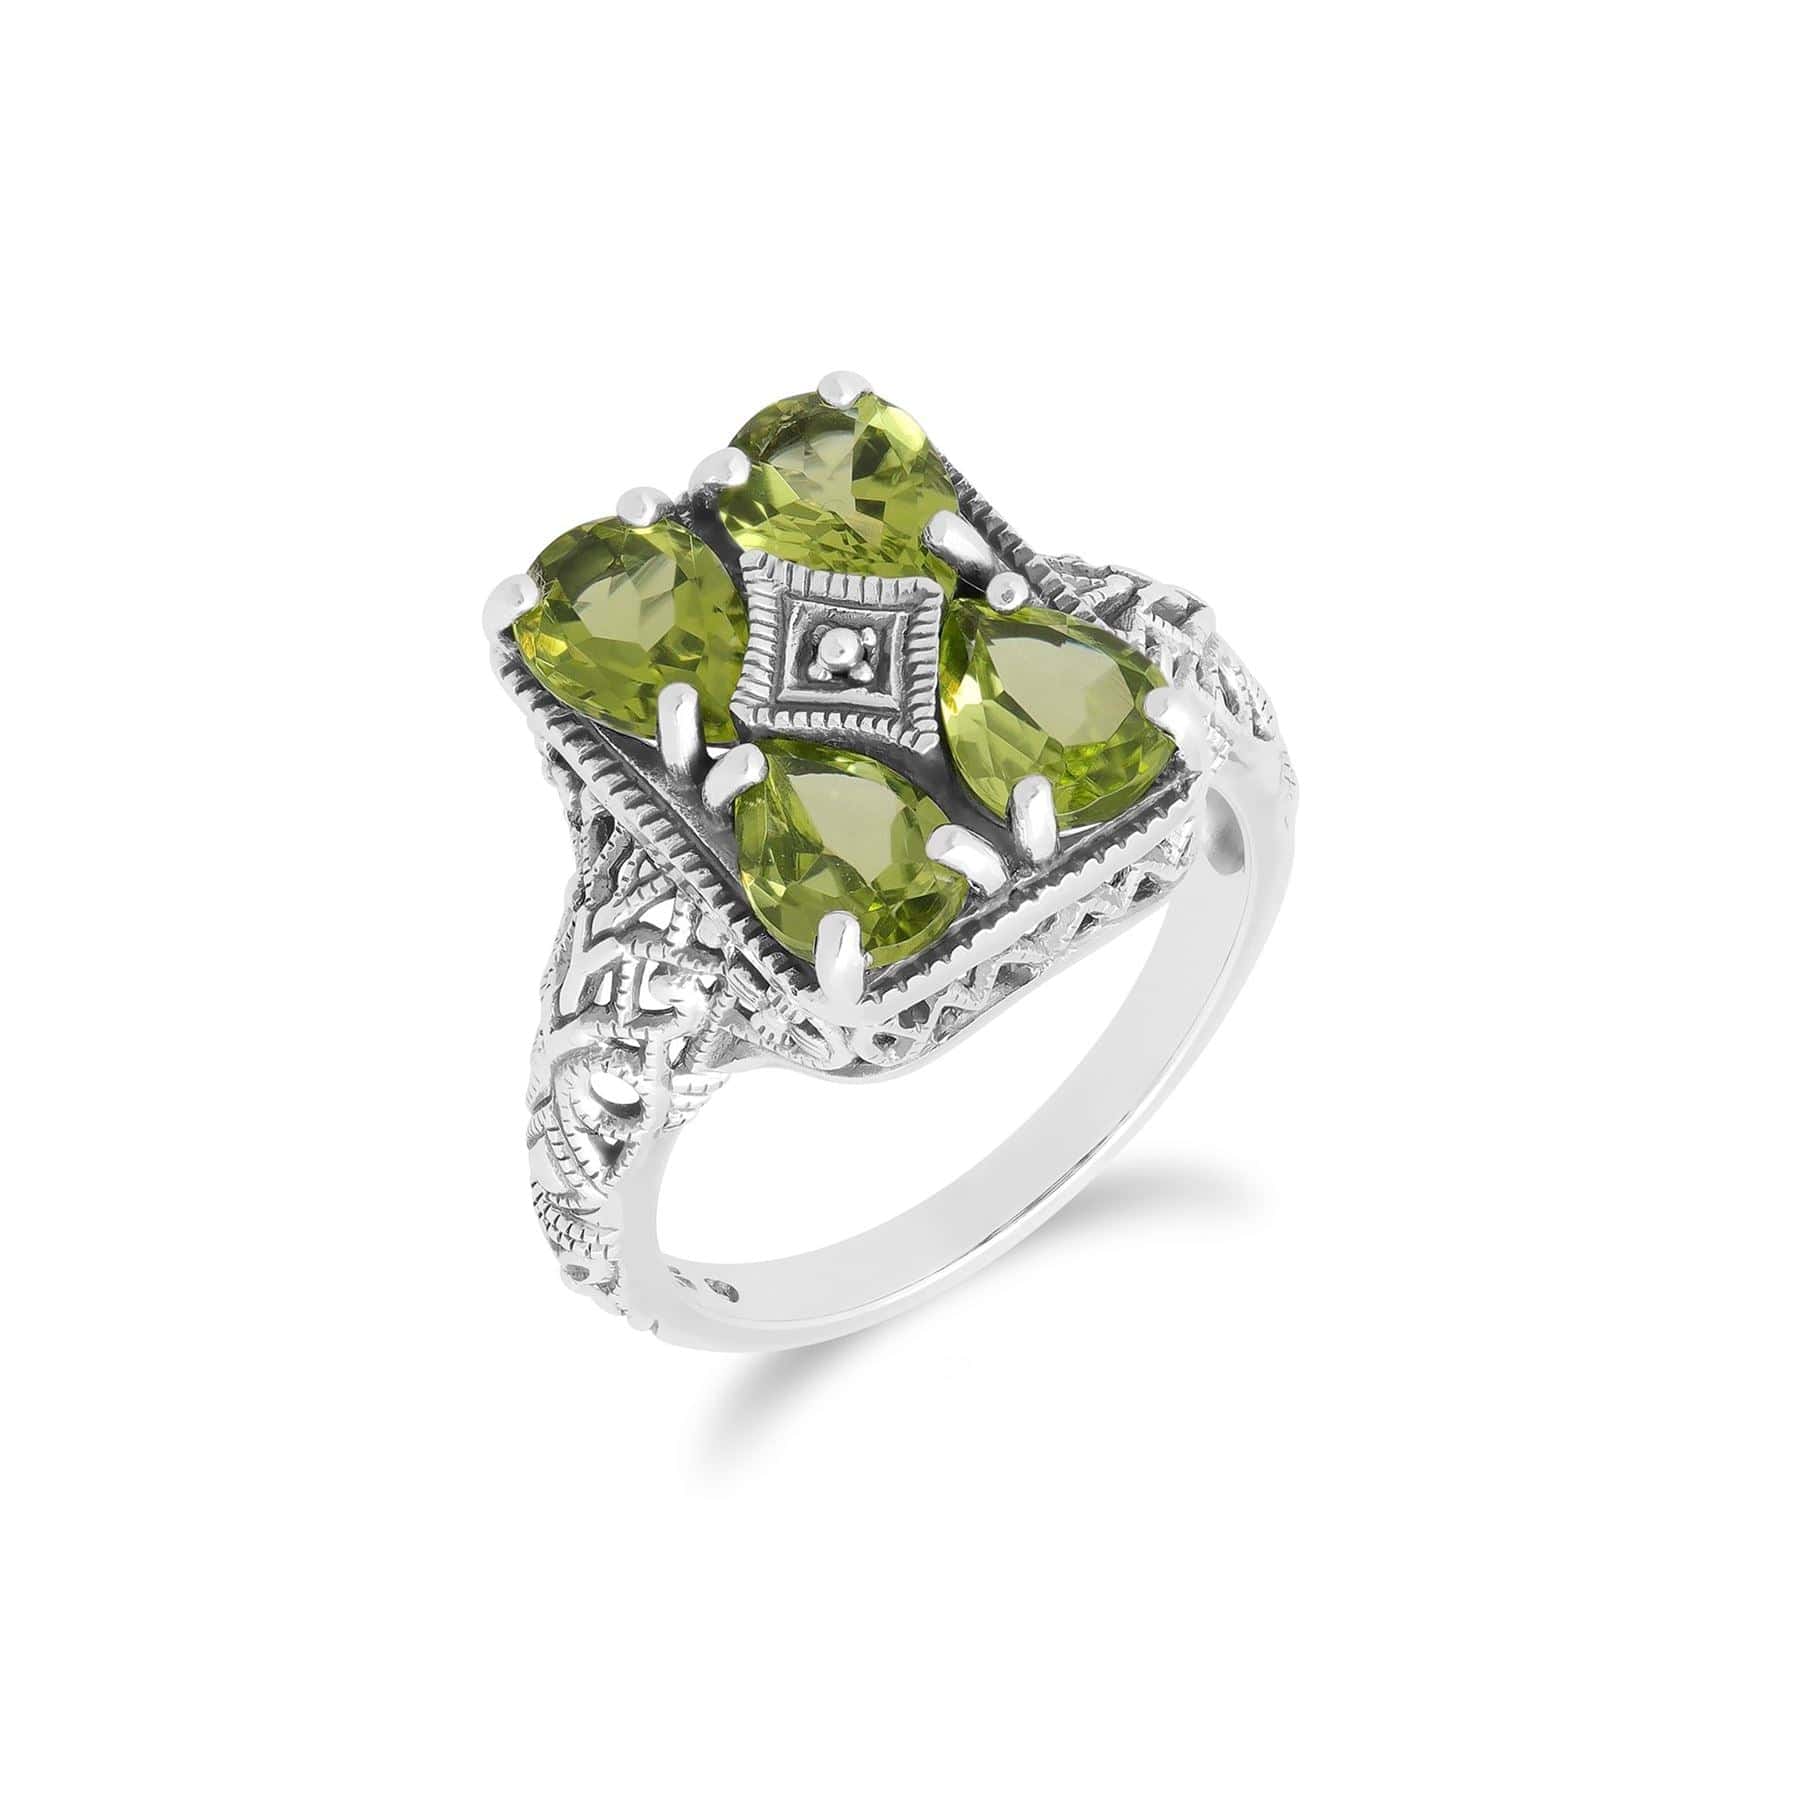 241R031008925 Art Nouveau Inspired Peridot Statement Ring in 925 Sterling Silver 1